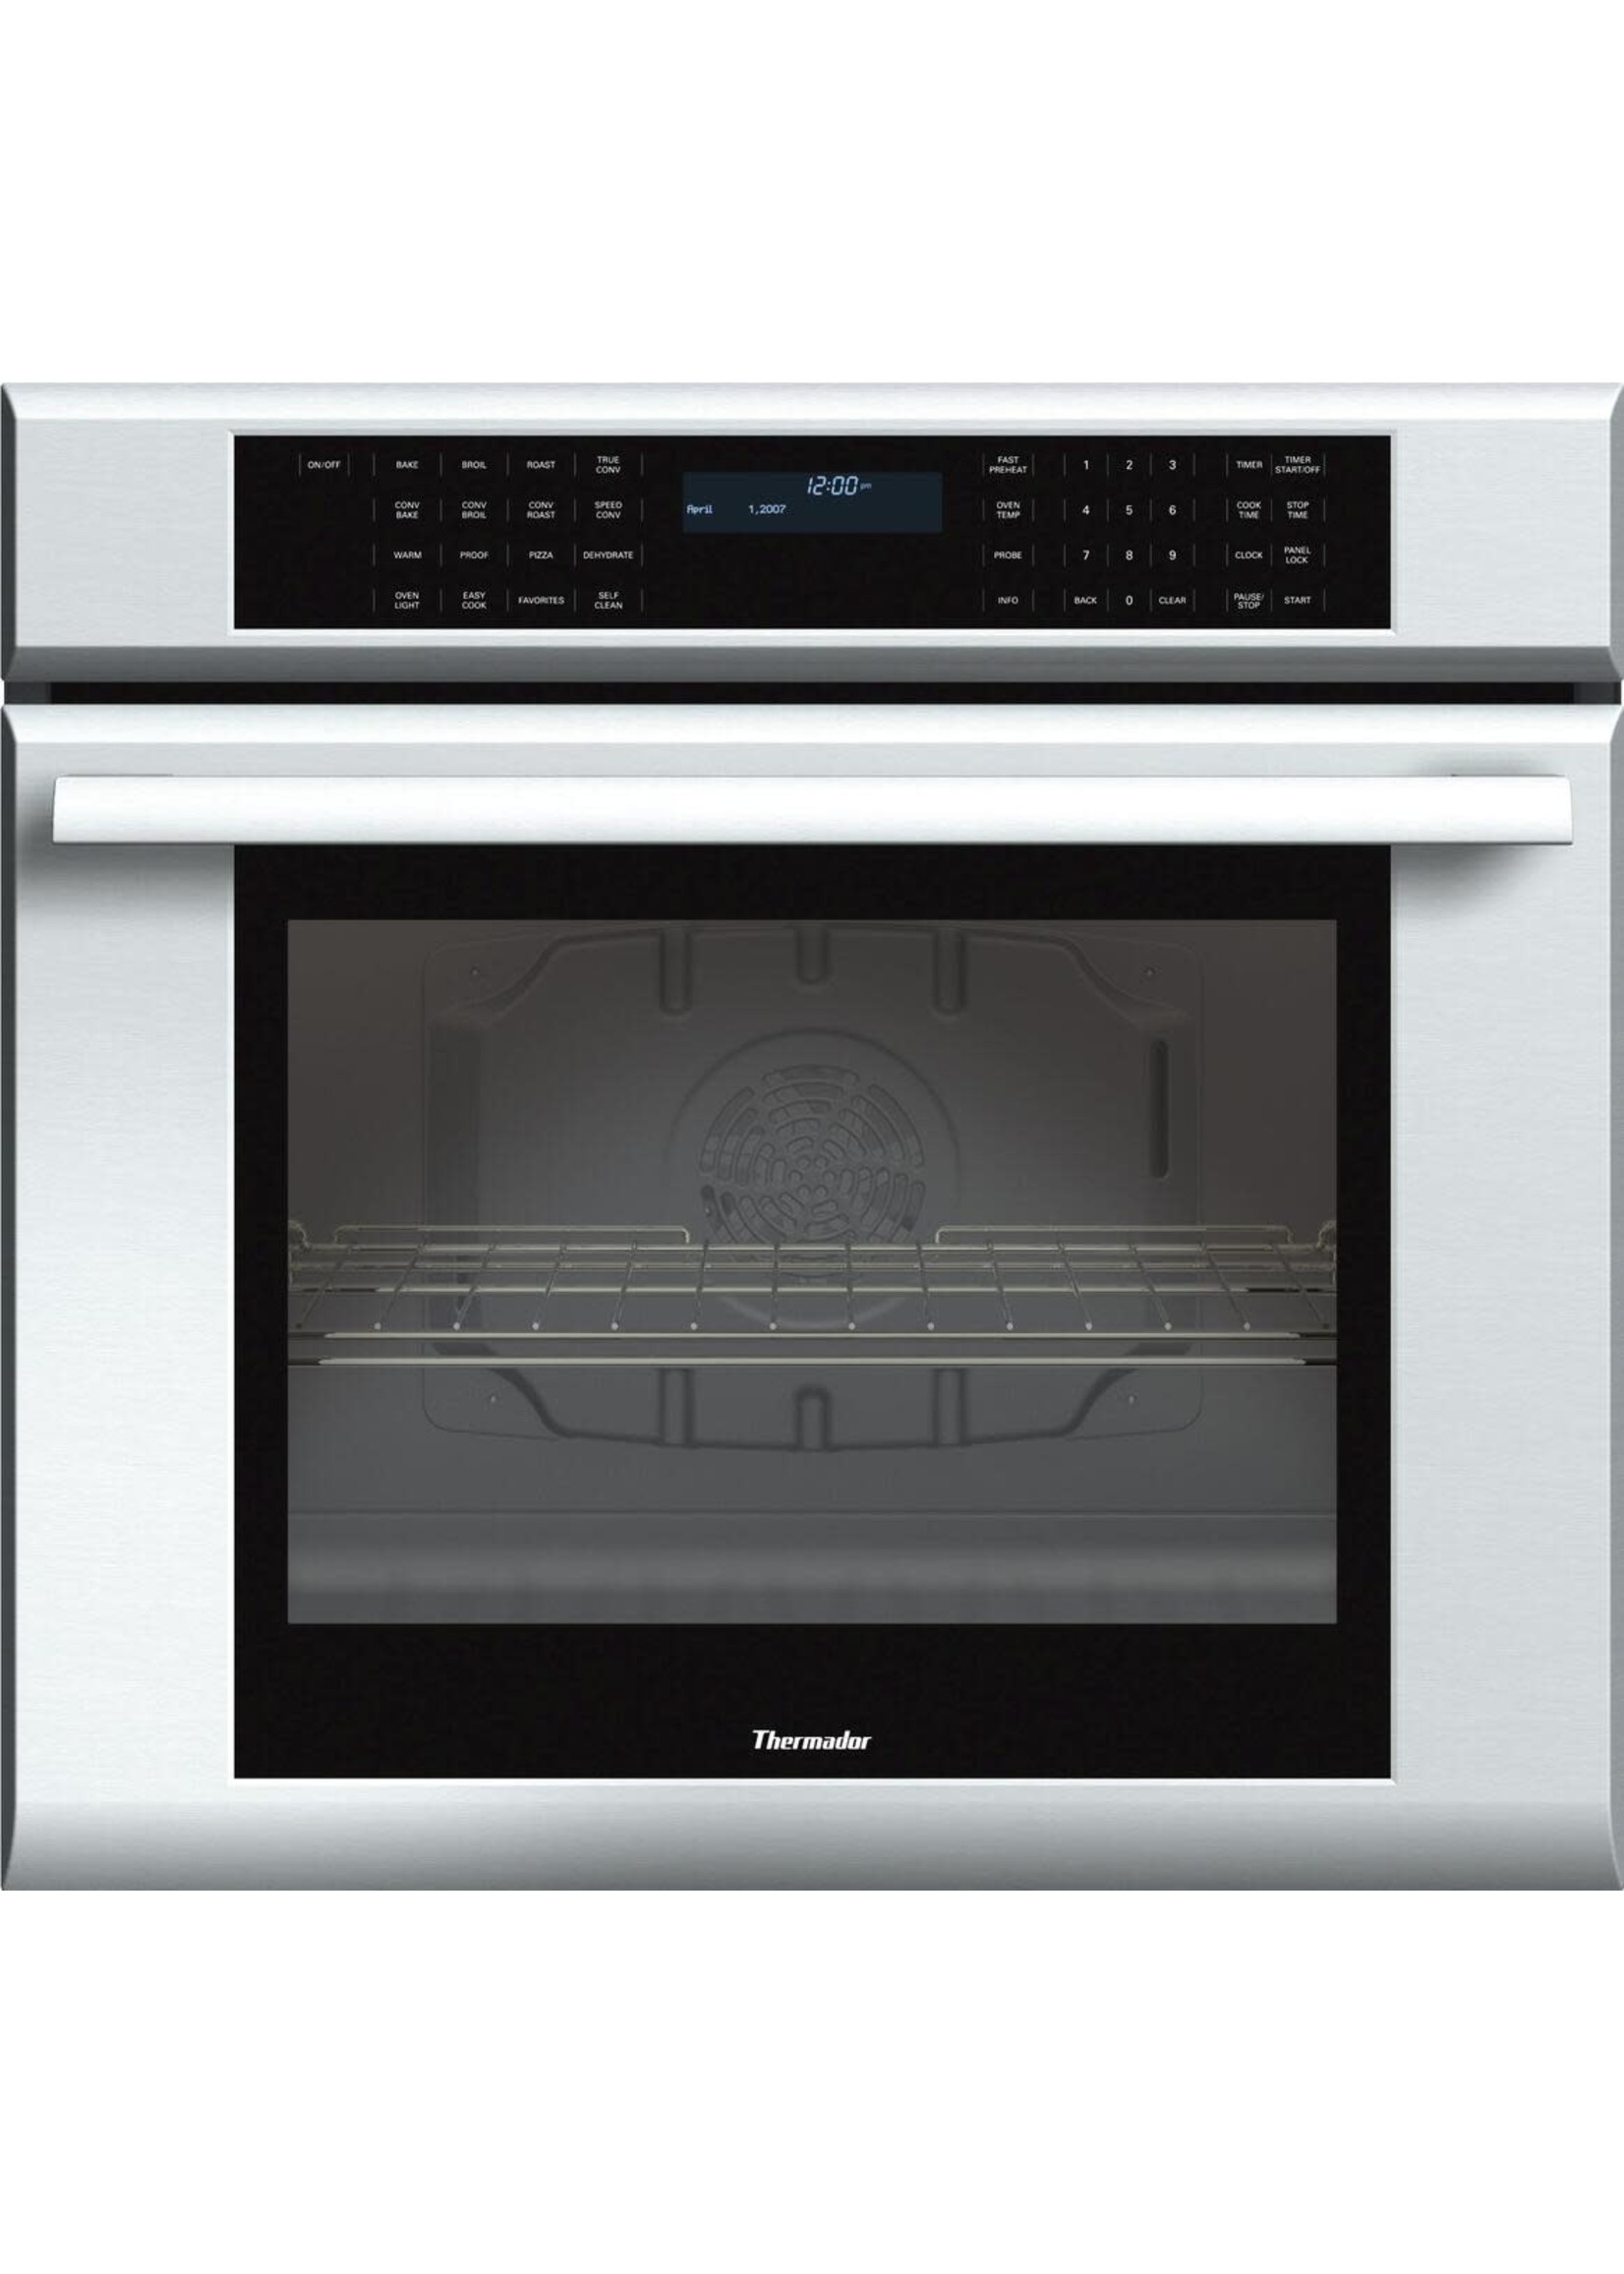 THERMADOR Masterpiece Series 30 Inch 4.7 cu. ft. Thermador Total Capacity Electric Single Wall Oven